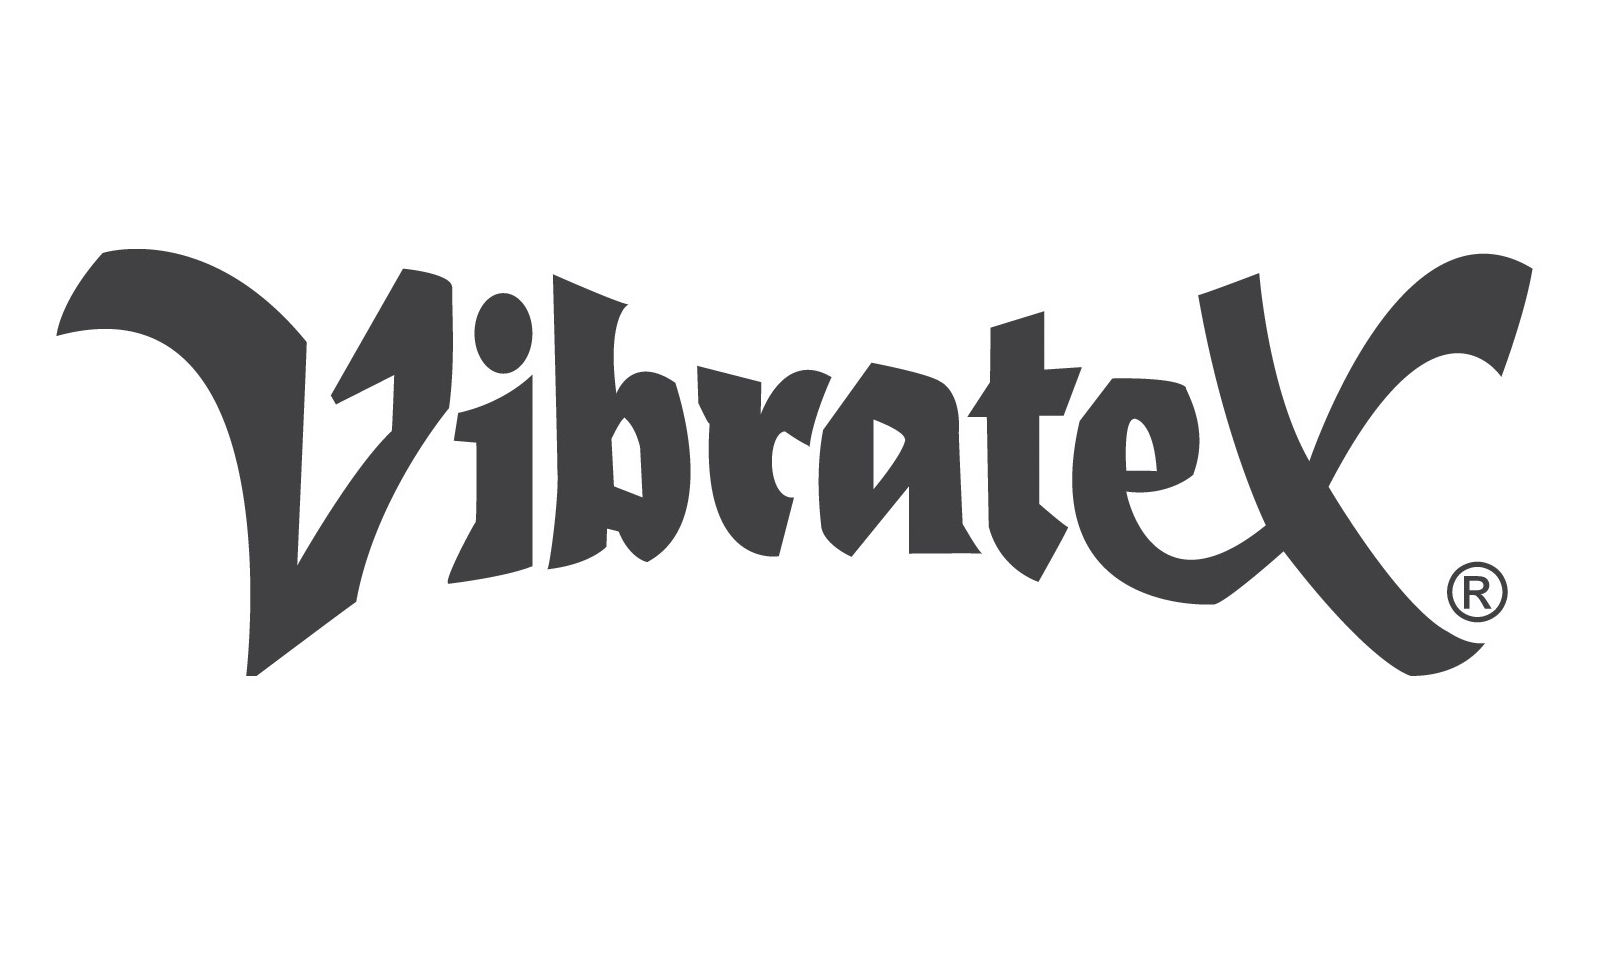 New Website Launched For Vibratex